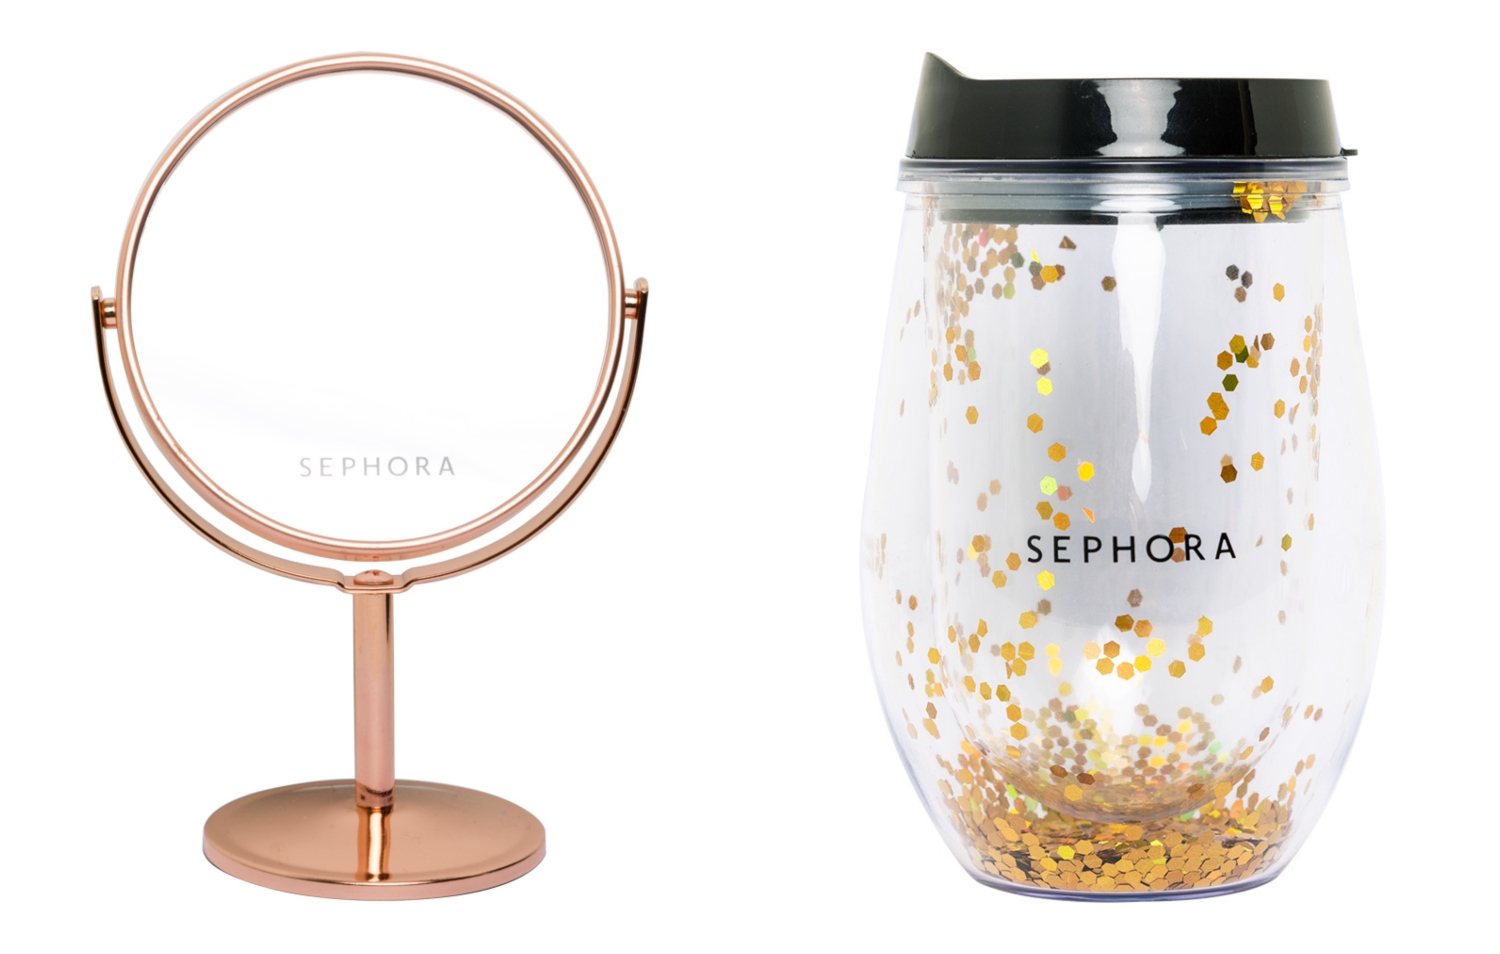 Sephora table mirror and Stay Tuned Gold Tumbler